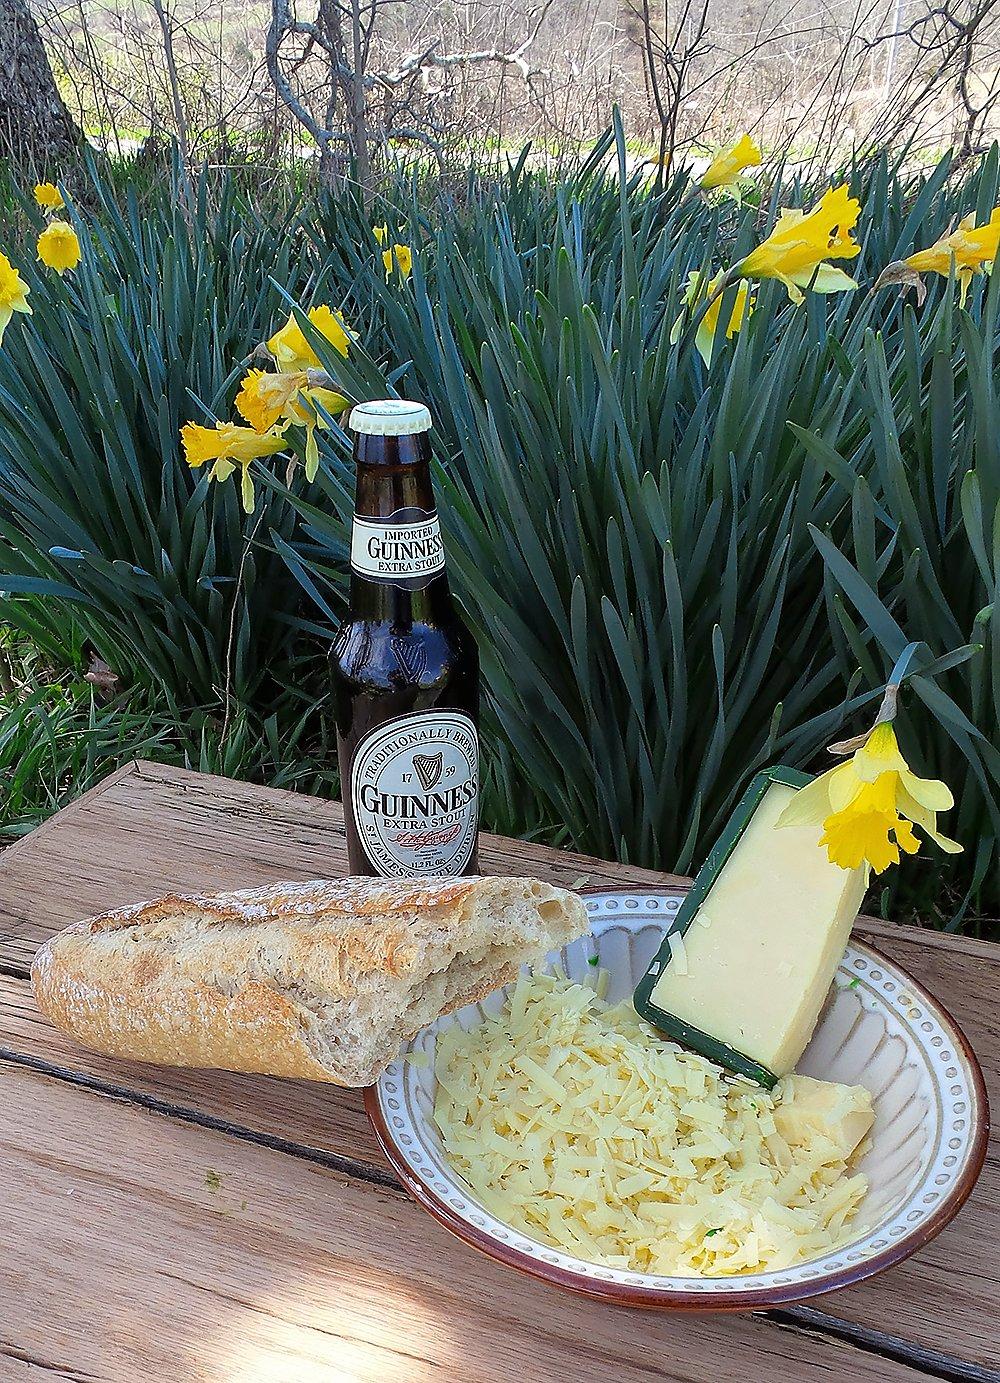 Guinness Beer and Irish Cheddar give this American favorite an Irish feel.